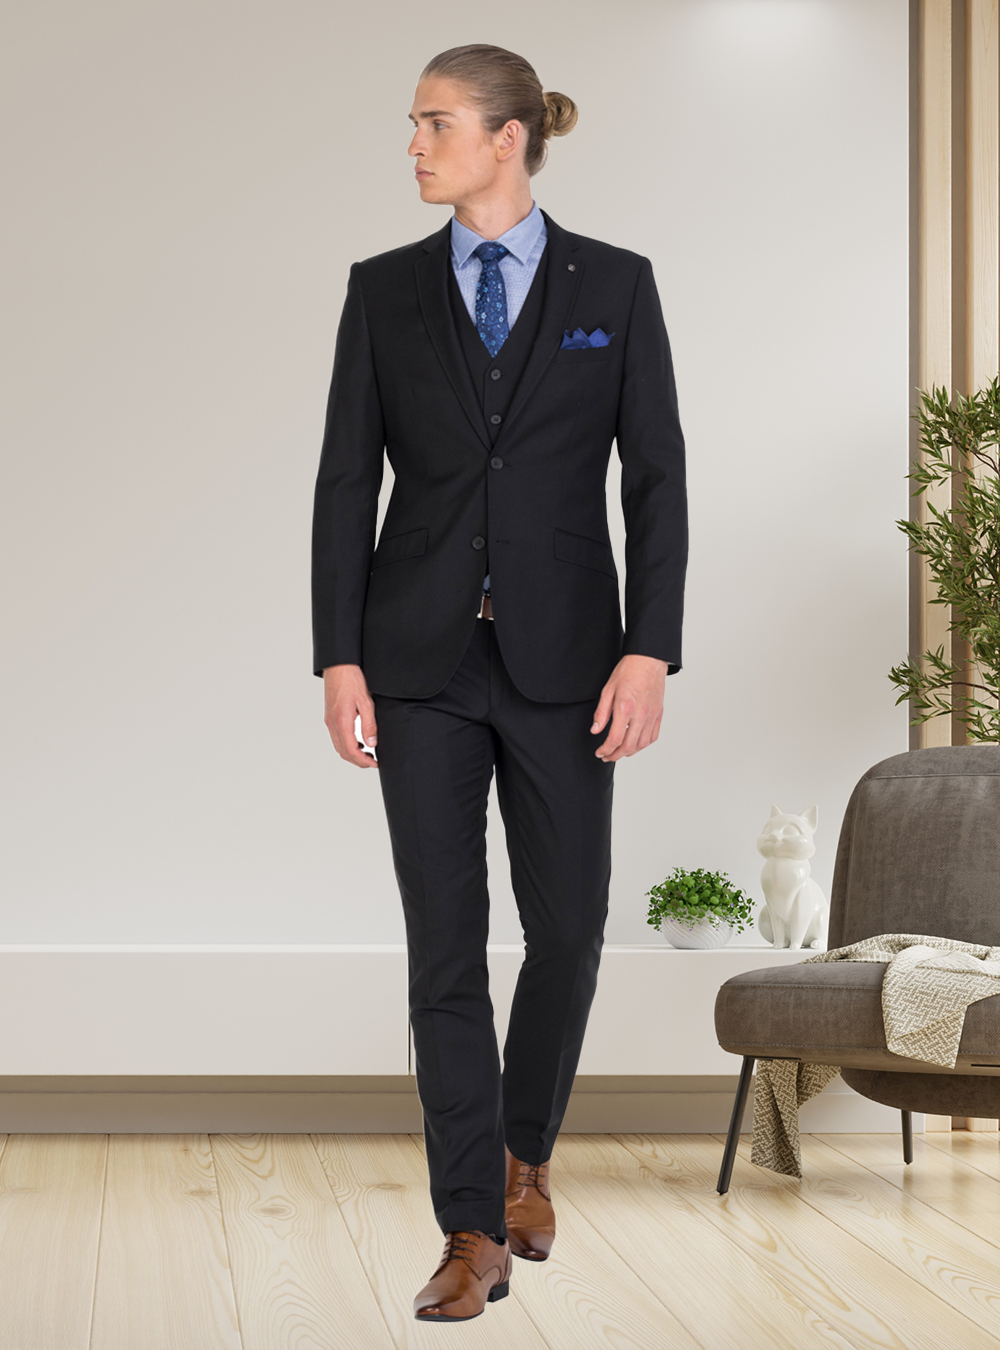 black three-piece suit, blue dress shirt, navy tie, and brown derby shoes